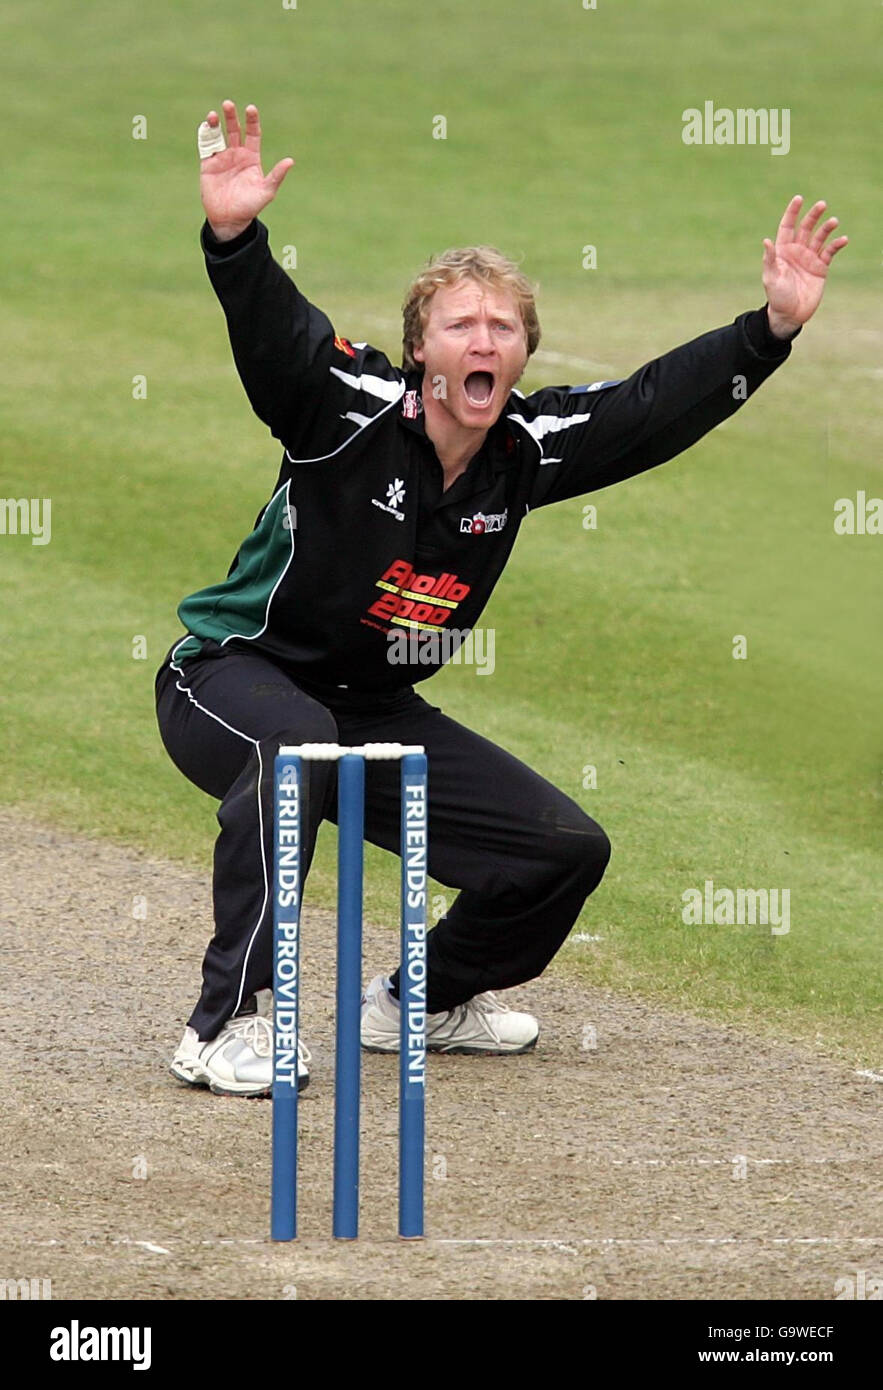 Worcestershire's Gareth Batty appeals during the Friends Provident Trophy Northern Conference match against Leicestershire at New Road, Worcester. Stock Photo